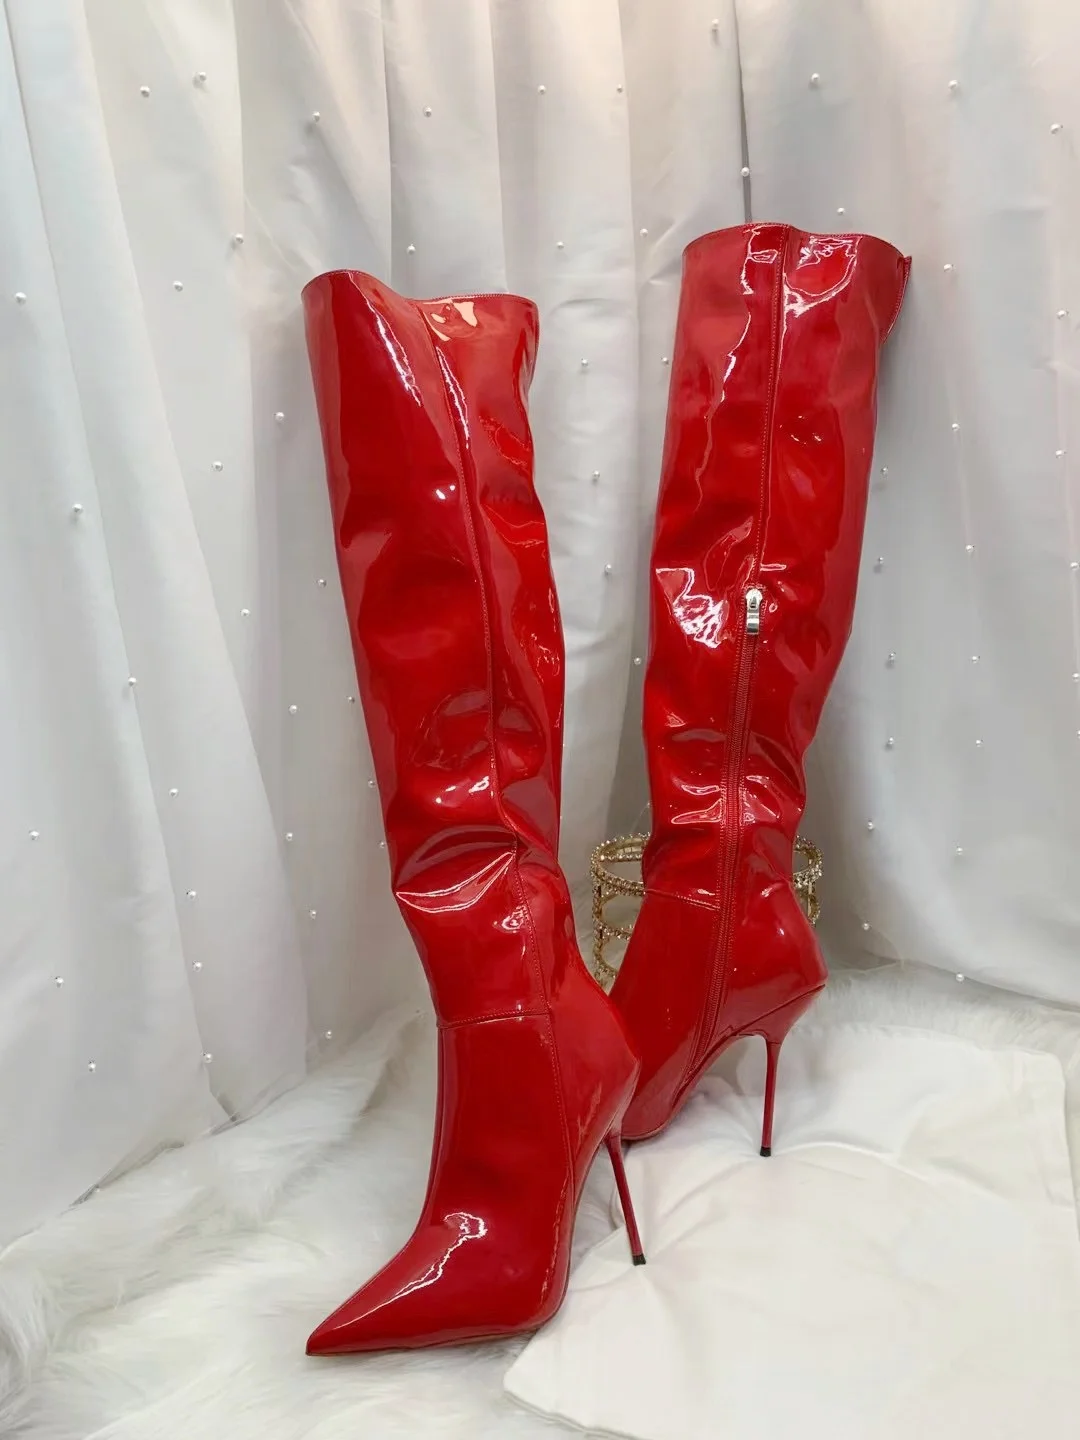 Custom-made New Style Over-the-knee High Heeled Boots Shoes Stiletto ...